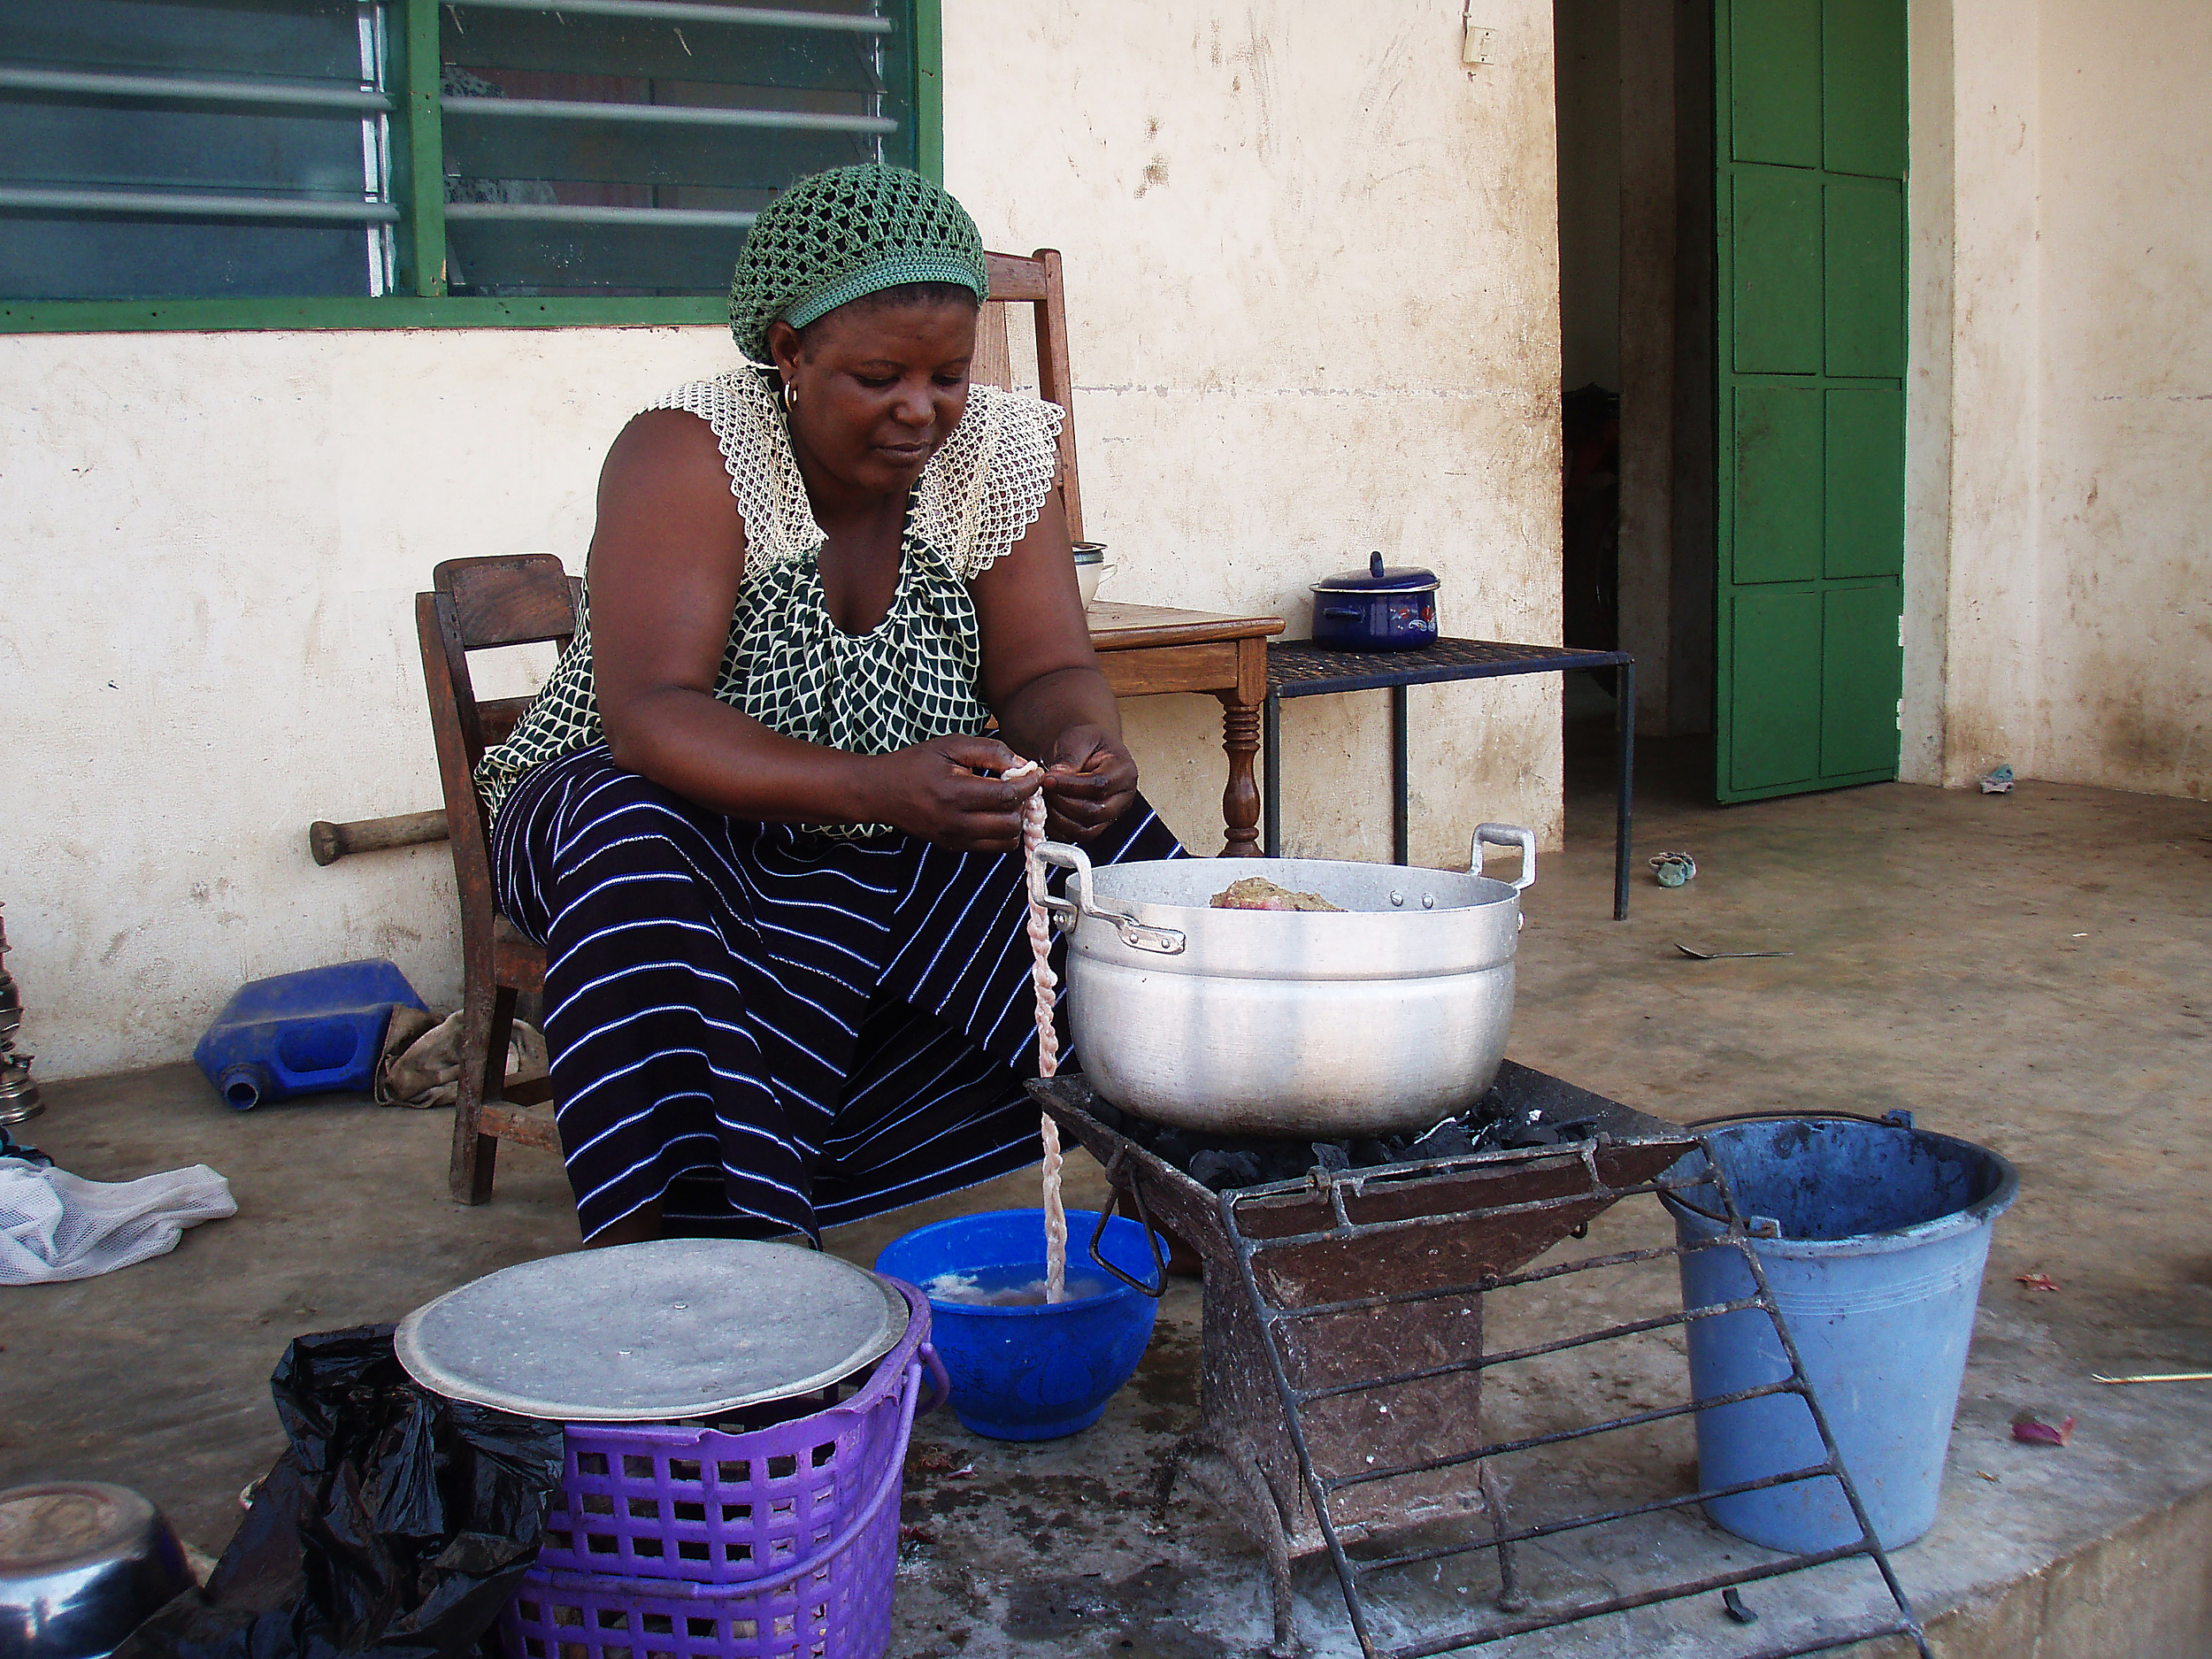  Falilah, one of the village nurse’s two wives, makes sausage from a sheep’s intestines. On Tabaski, or Eid al-Adha (or the “Festival of Sheep” in Togo), families slaughter a sheep to commemorate Abraham’s willingness to sacrifice his son Isaac to Go